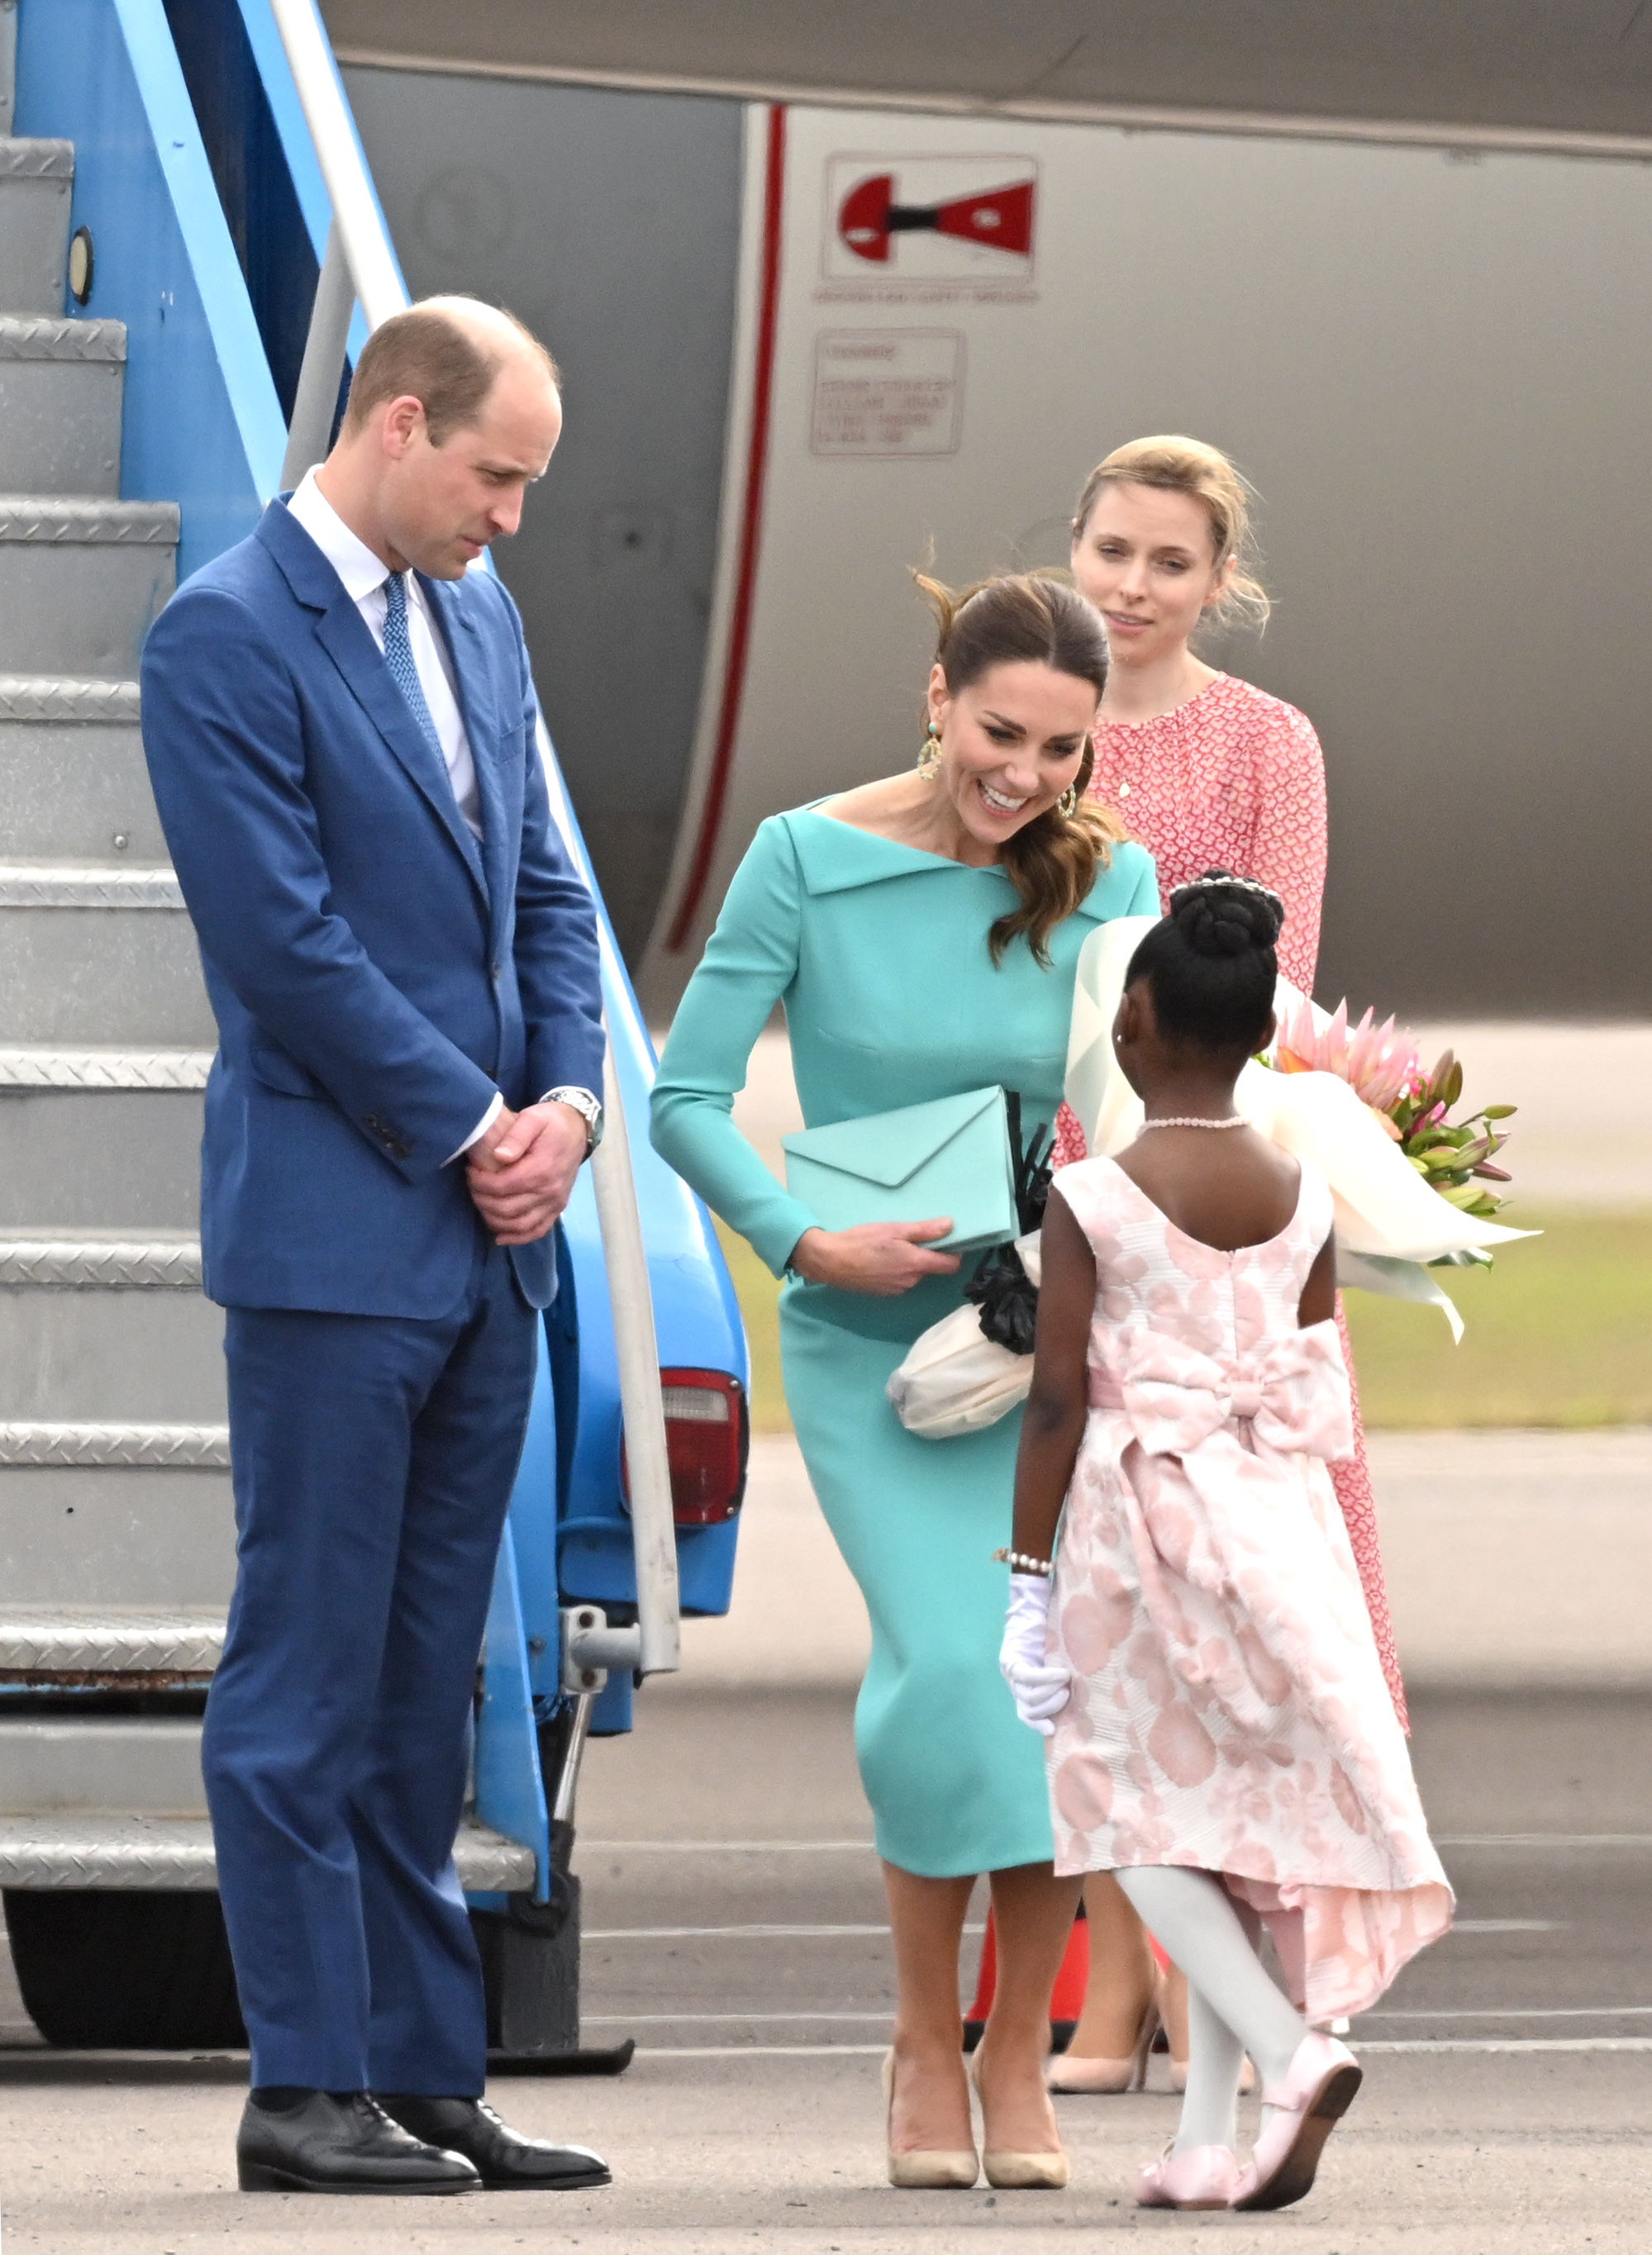 Aniah Moss gives Kate Middleton bouquet of flowers upon arrival in Nassau, Bahamas